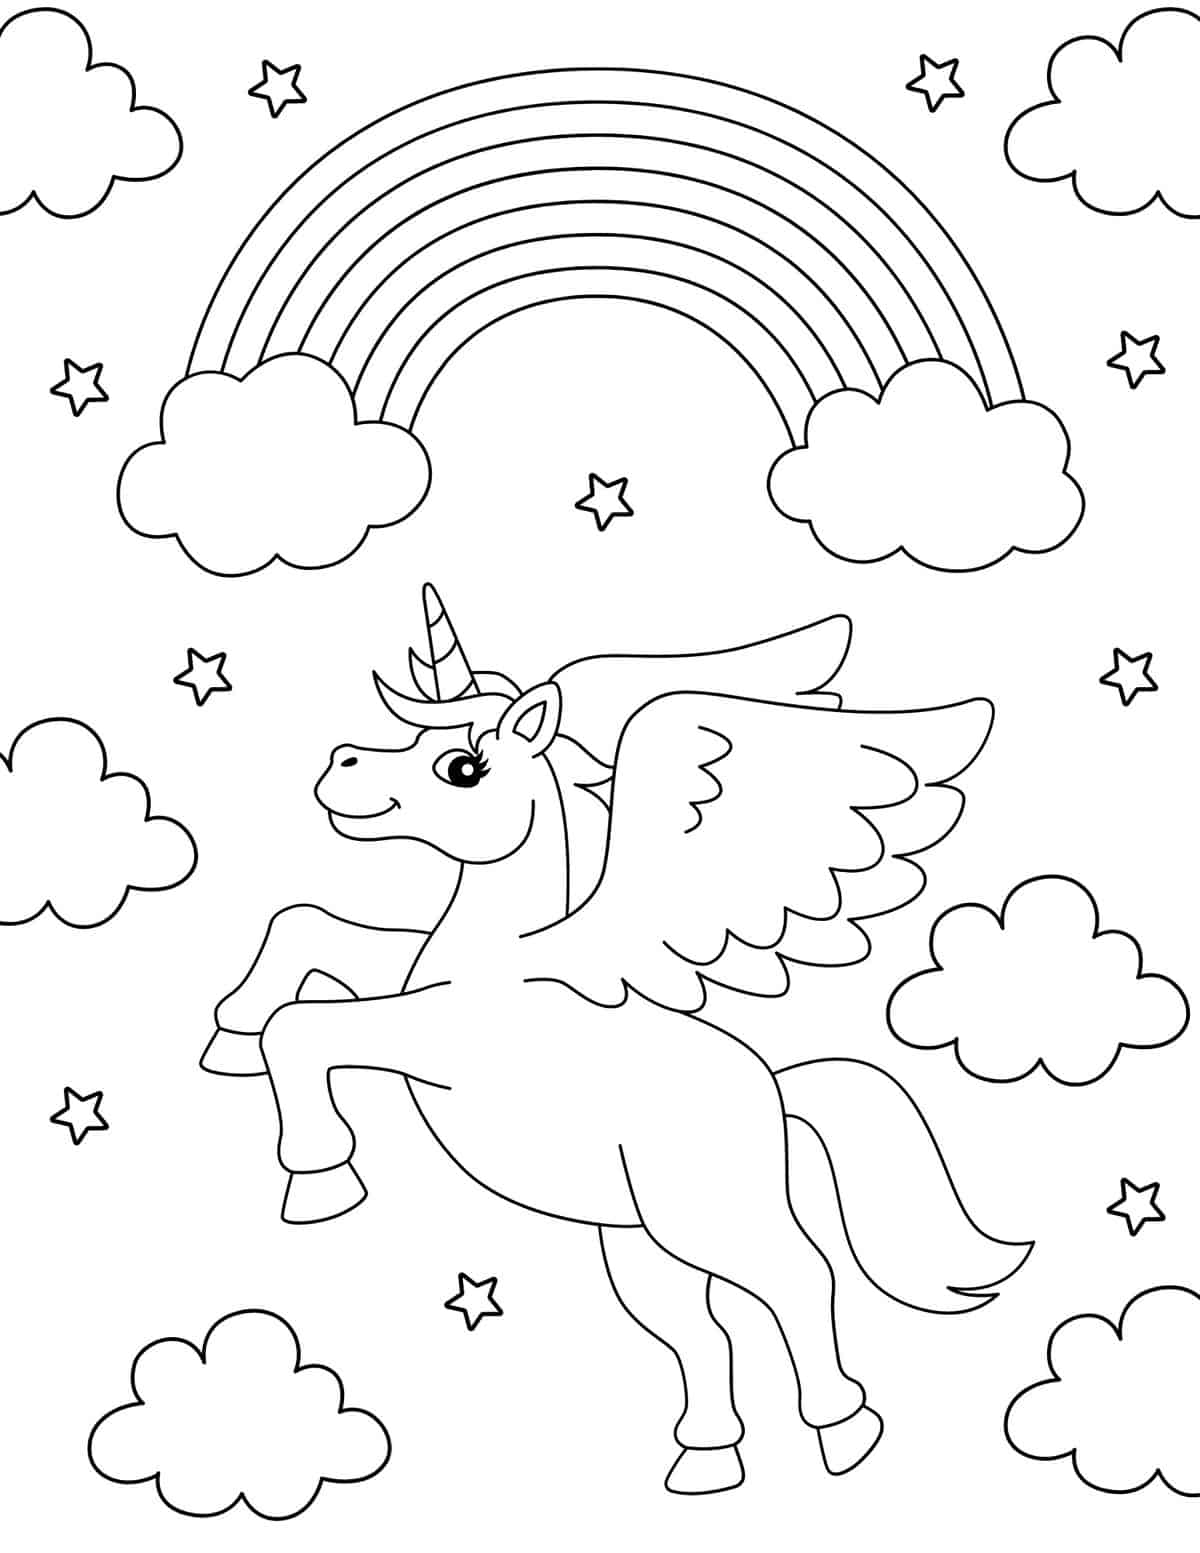 unicorn in the sky under a rainbow coloring sheet